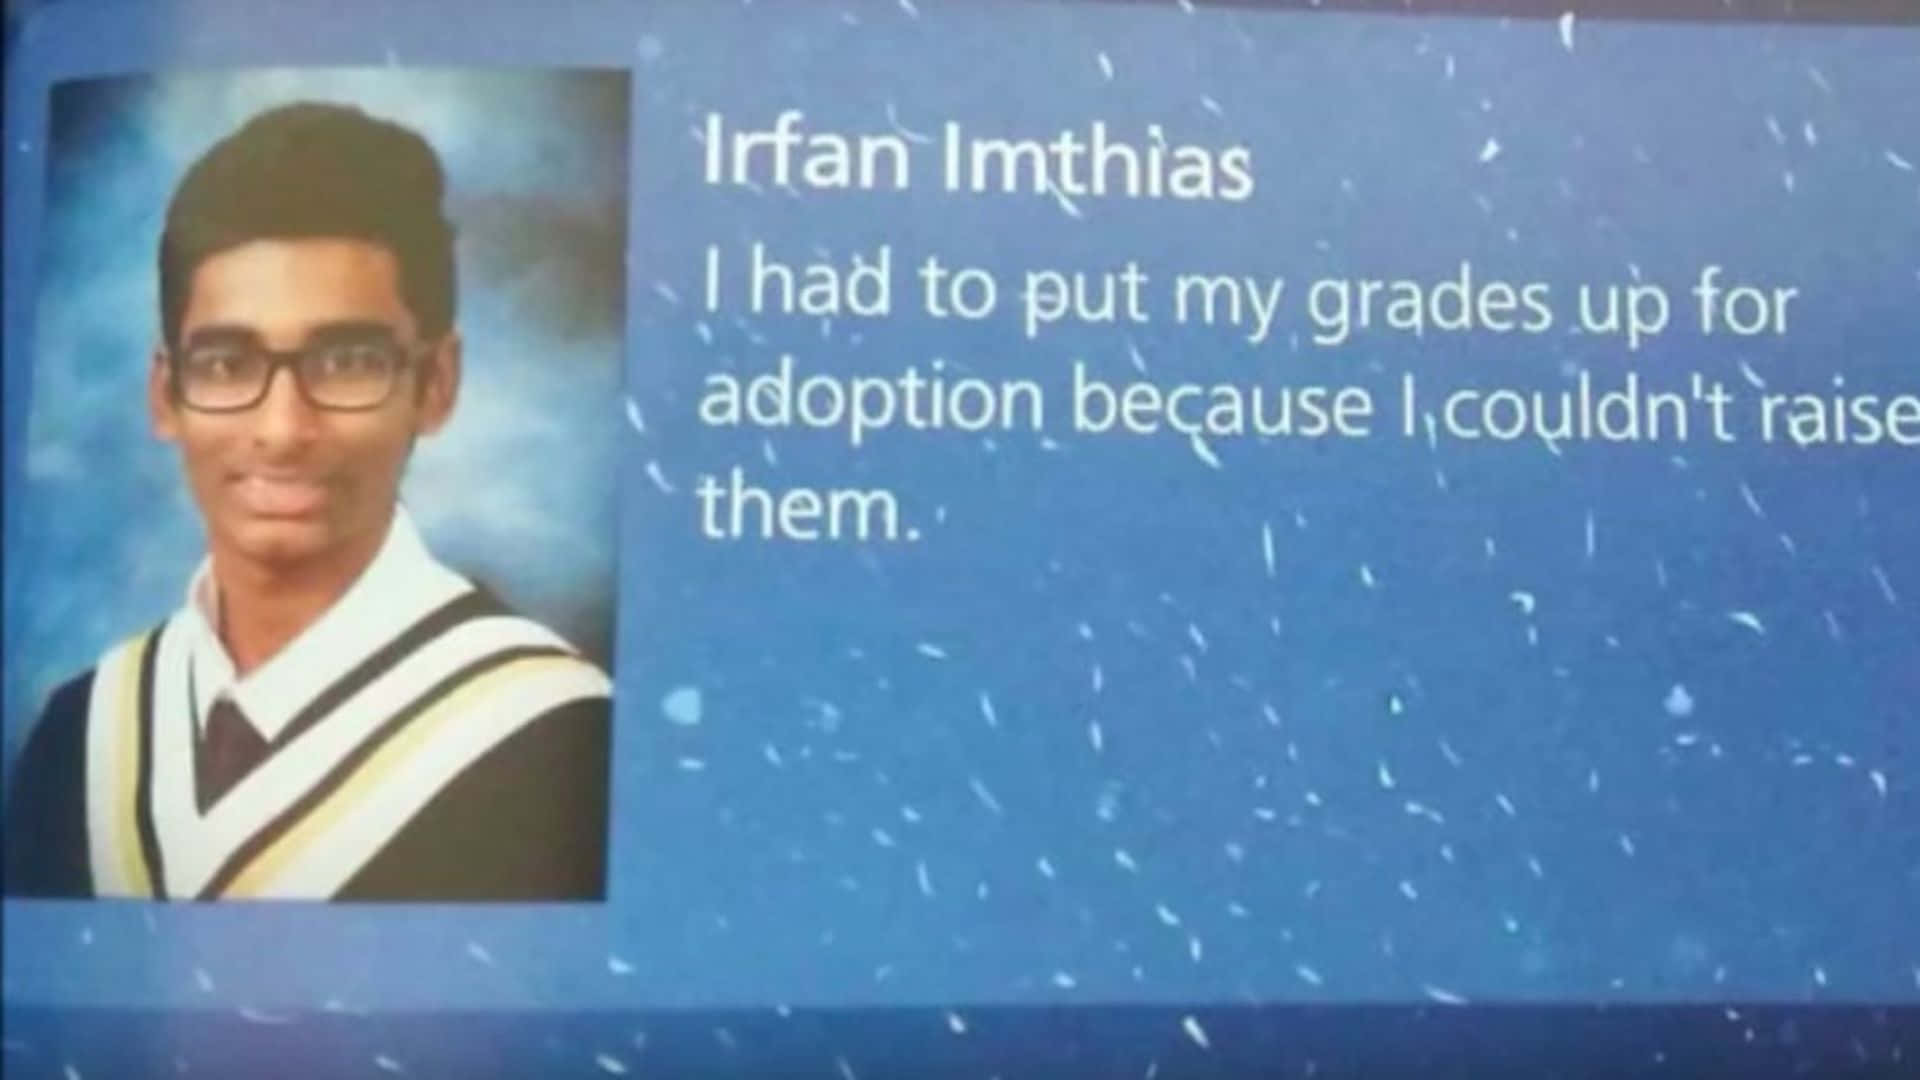 Iran Mithaias's Story Of How He Had To Adopt His Classmates Up To Raise Them